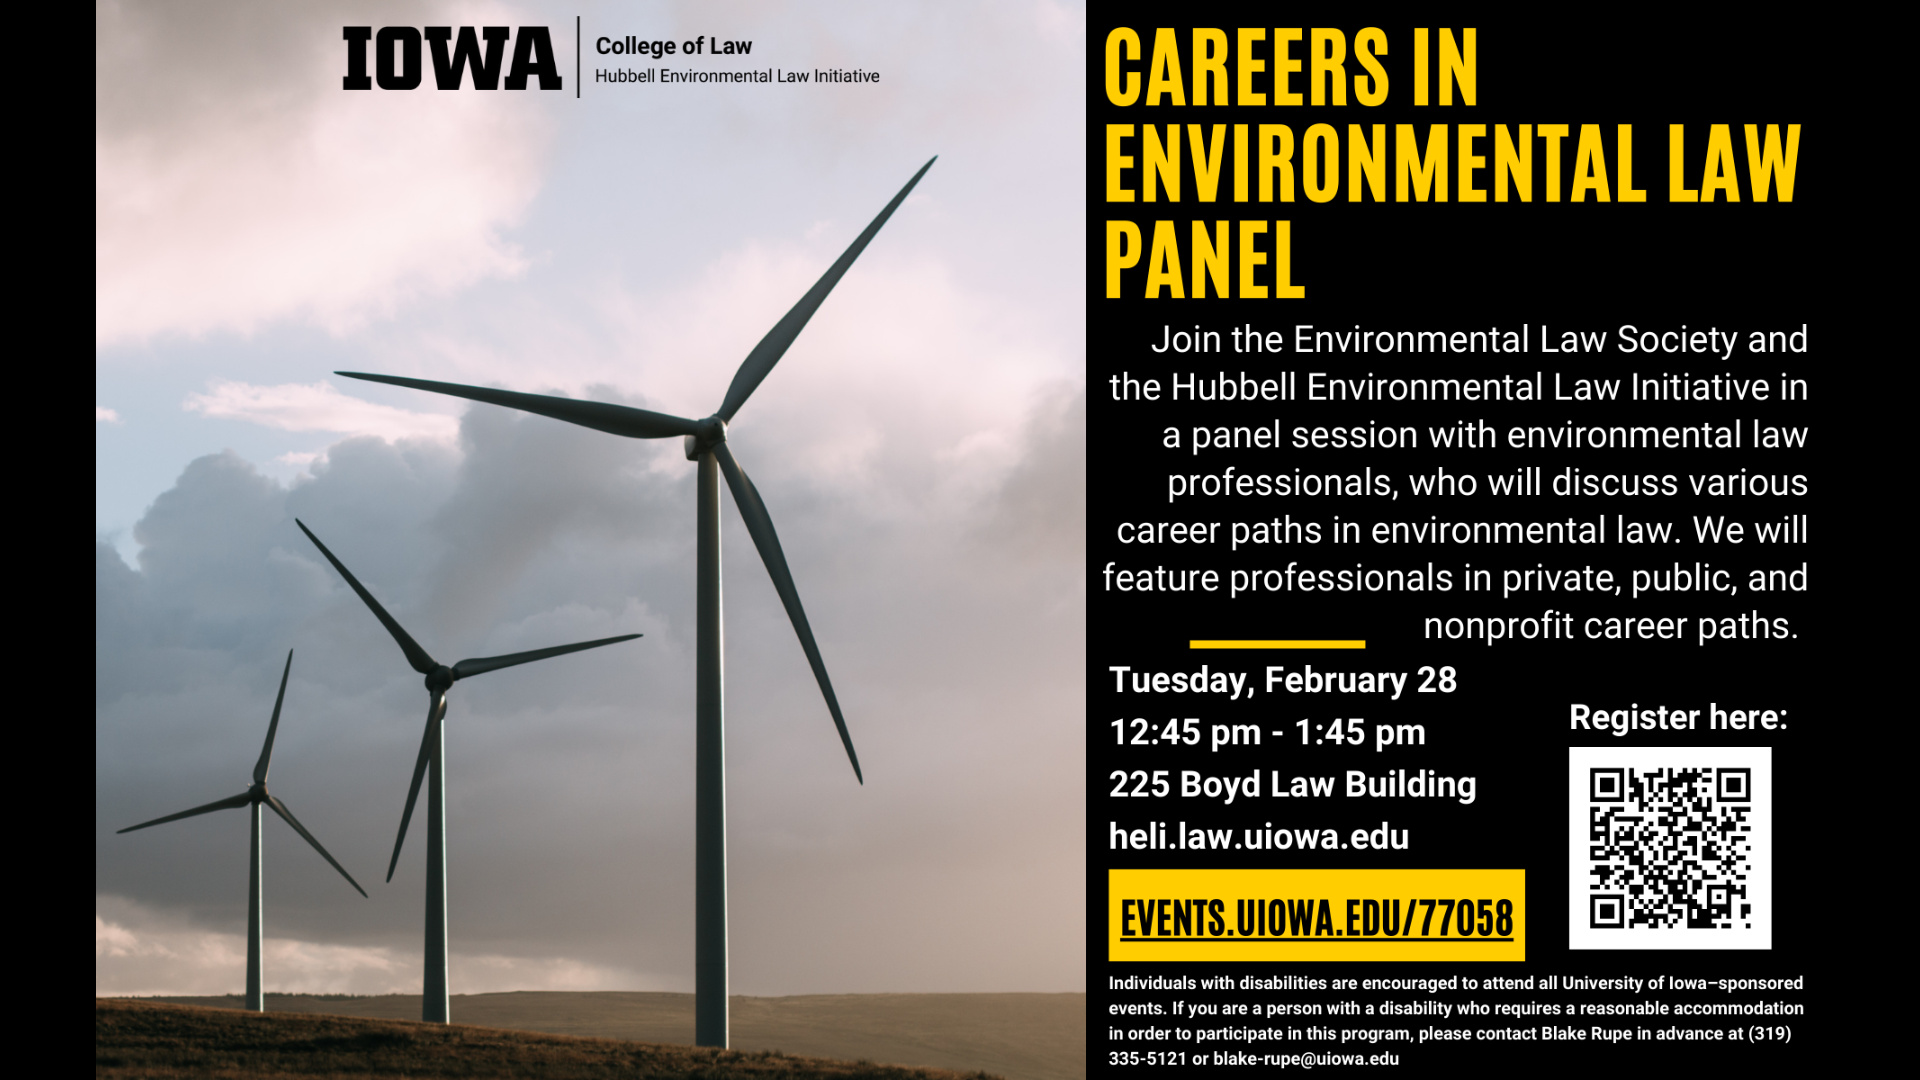 Careers in Environmental Law Panel:    Join the Environmental Law Society and the Hubbell Environmental Law Initiative in a panel session with environmental law professionals, who will discuss various career paths in environmental law. We will feature professionals in private, public, and nonprofit career paths. Tuesday, February 28. 12:45 PM to 1:45 PM. 225 Boyd Law Building. heli.law.uiowa.edu. events.uiowa.edu/77058